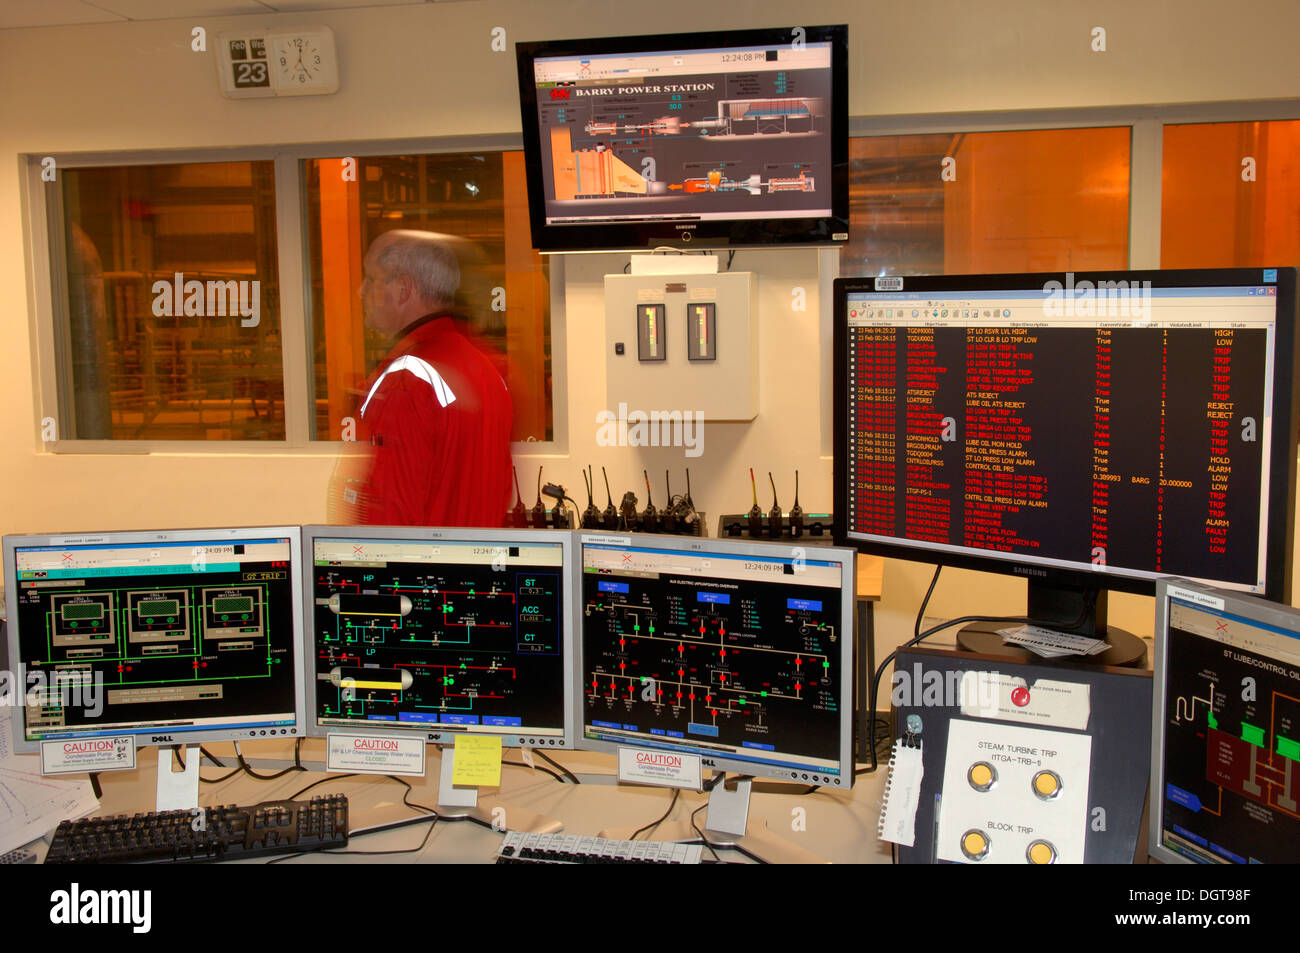 Control Room, with technition walking through. Barry Power Station owned by Centrica. Stock Photo